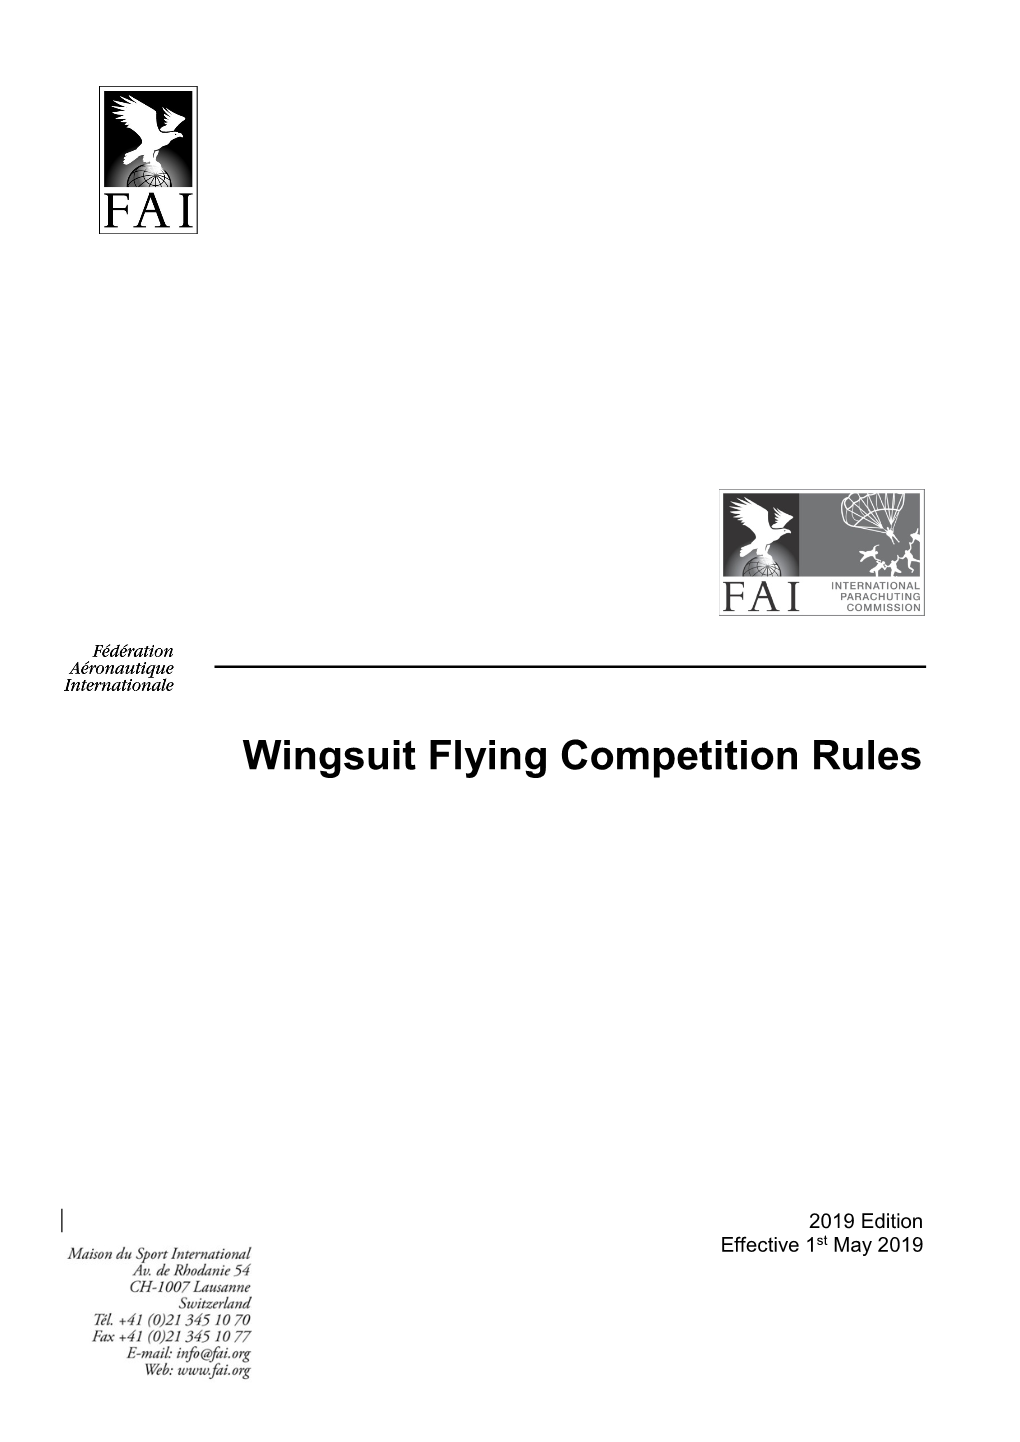 Wingsuit Flying Competition Rules